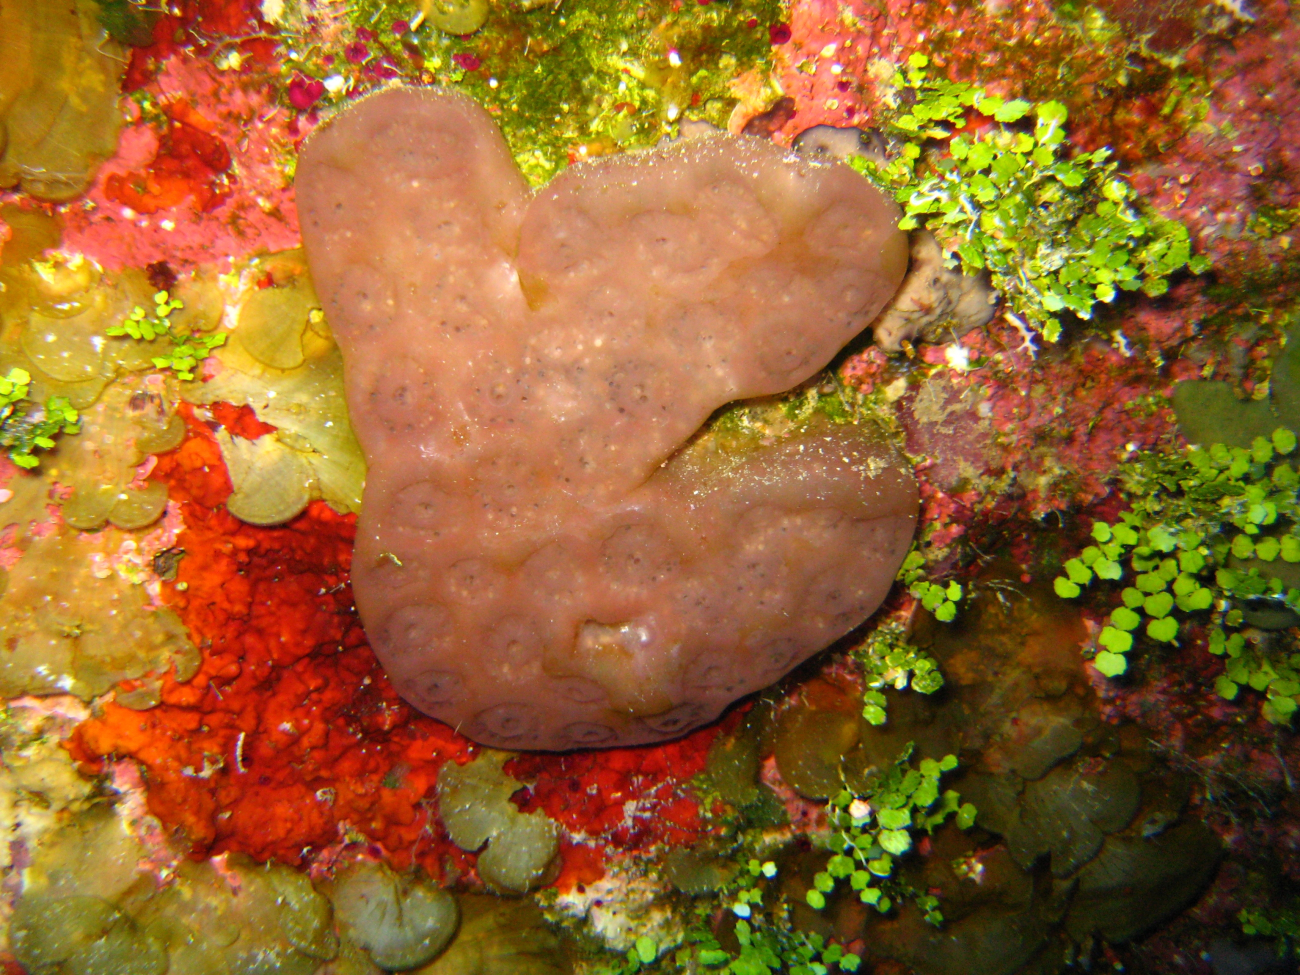 A liver-colored sponge in the midst of a number of different types ofalgae